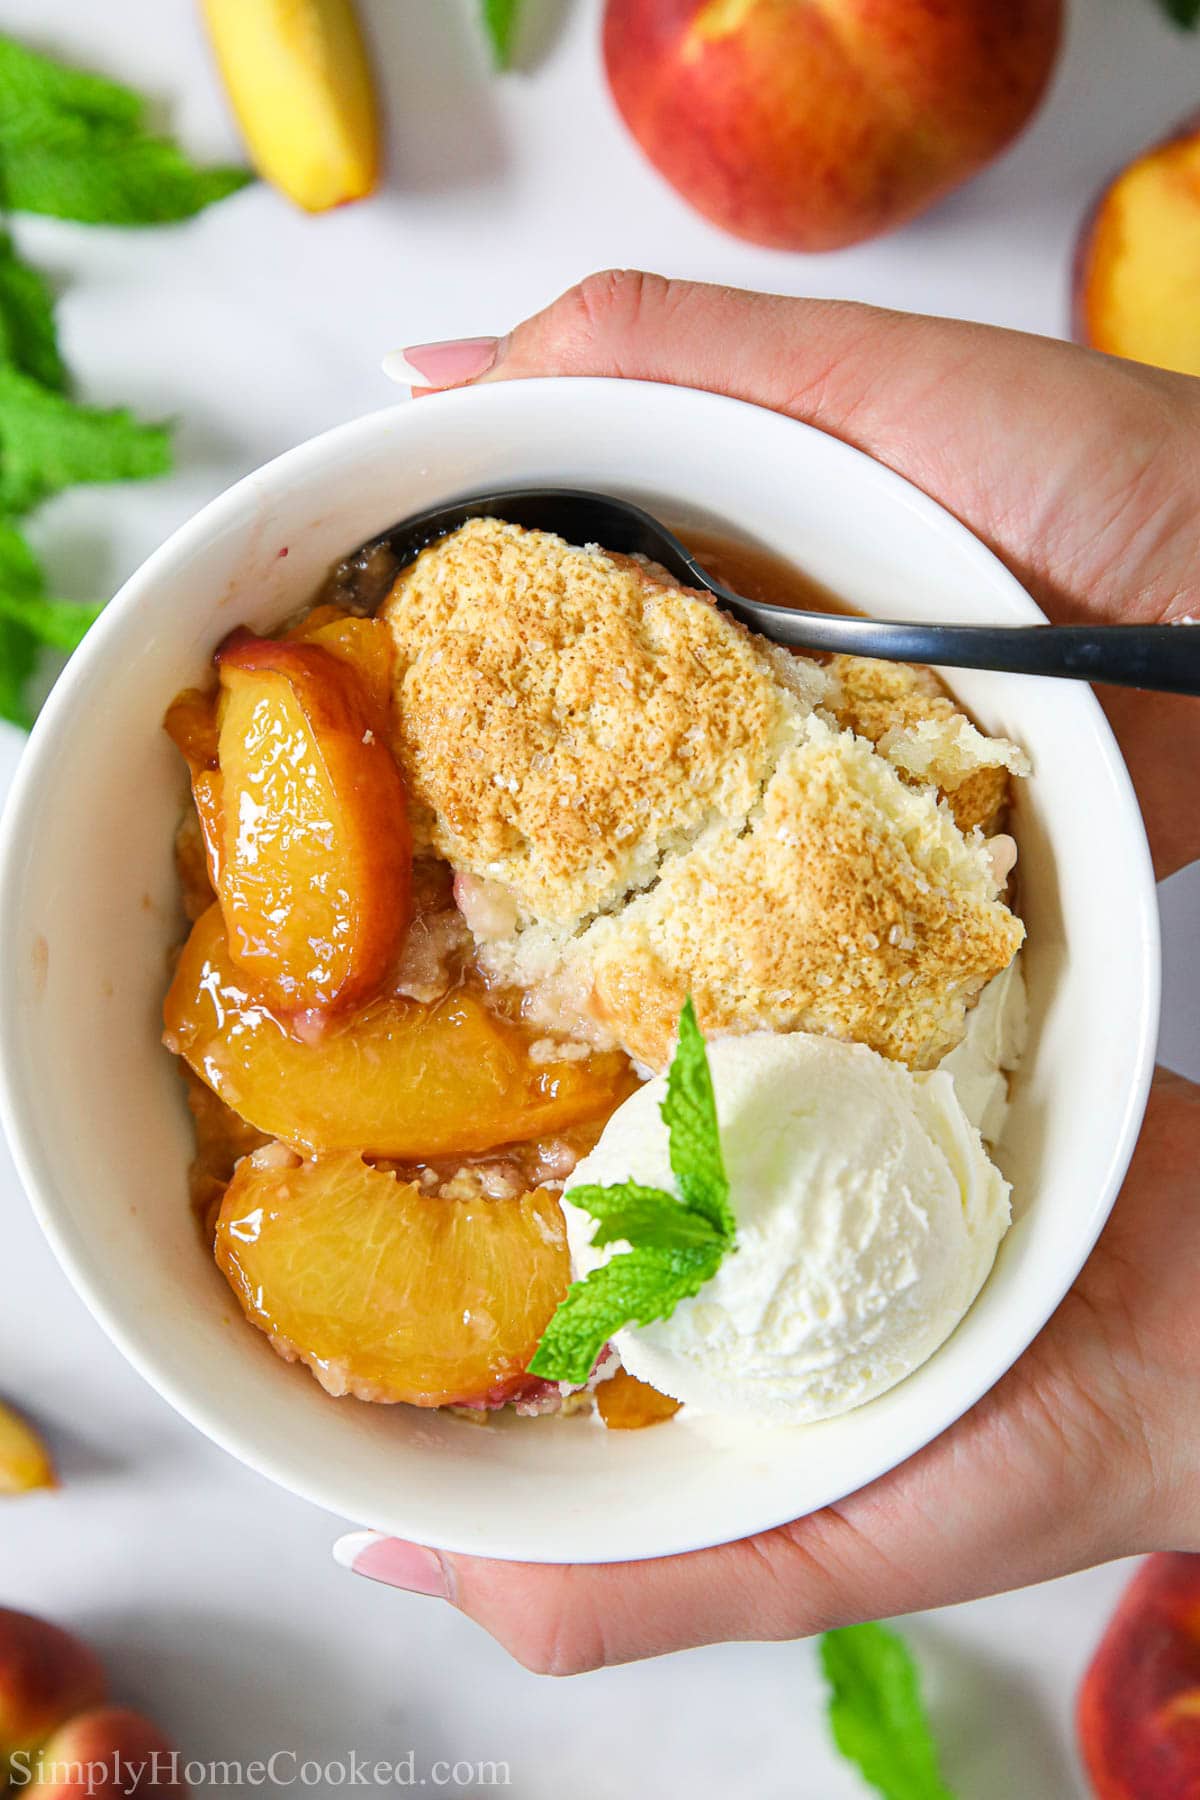 Hands holding a bowl of Easy Peach Cobbler with ice cream and a spoon.